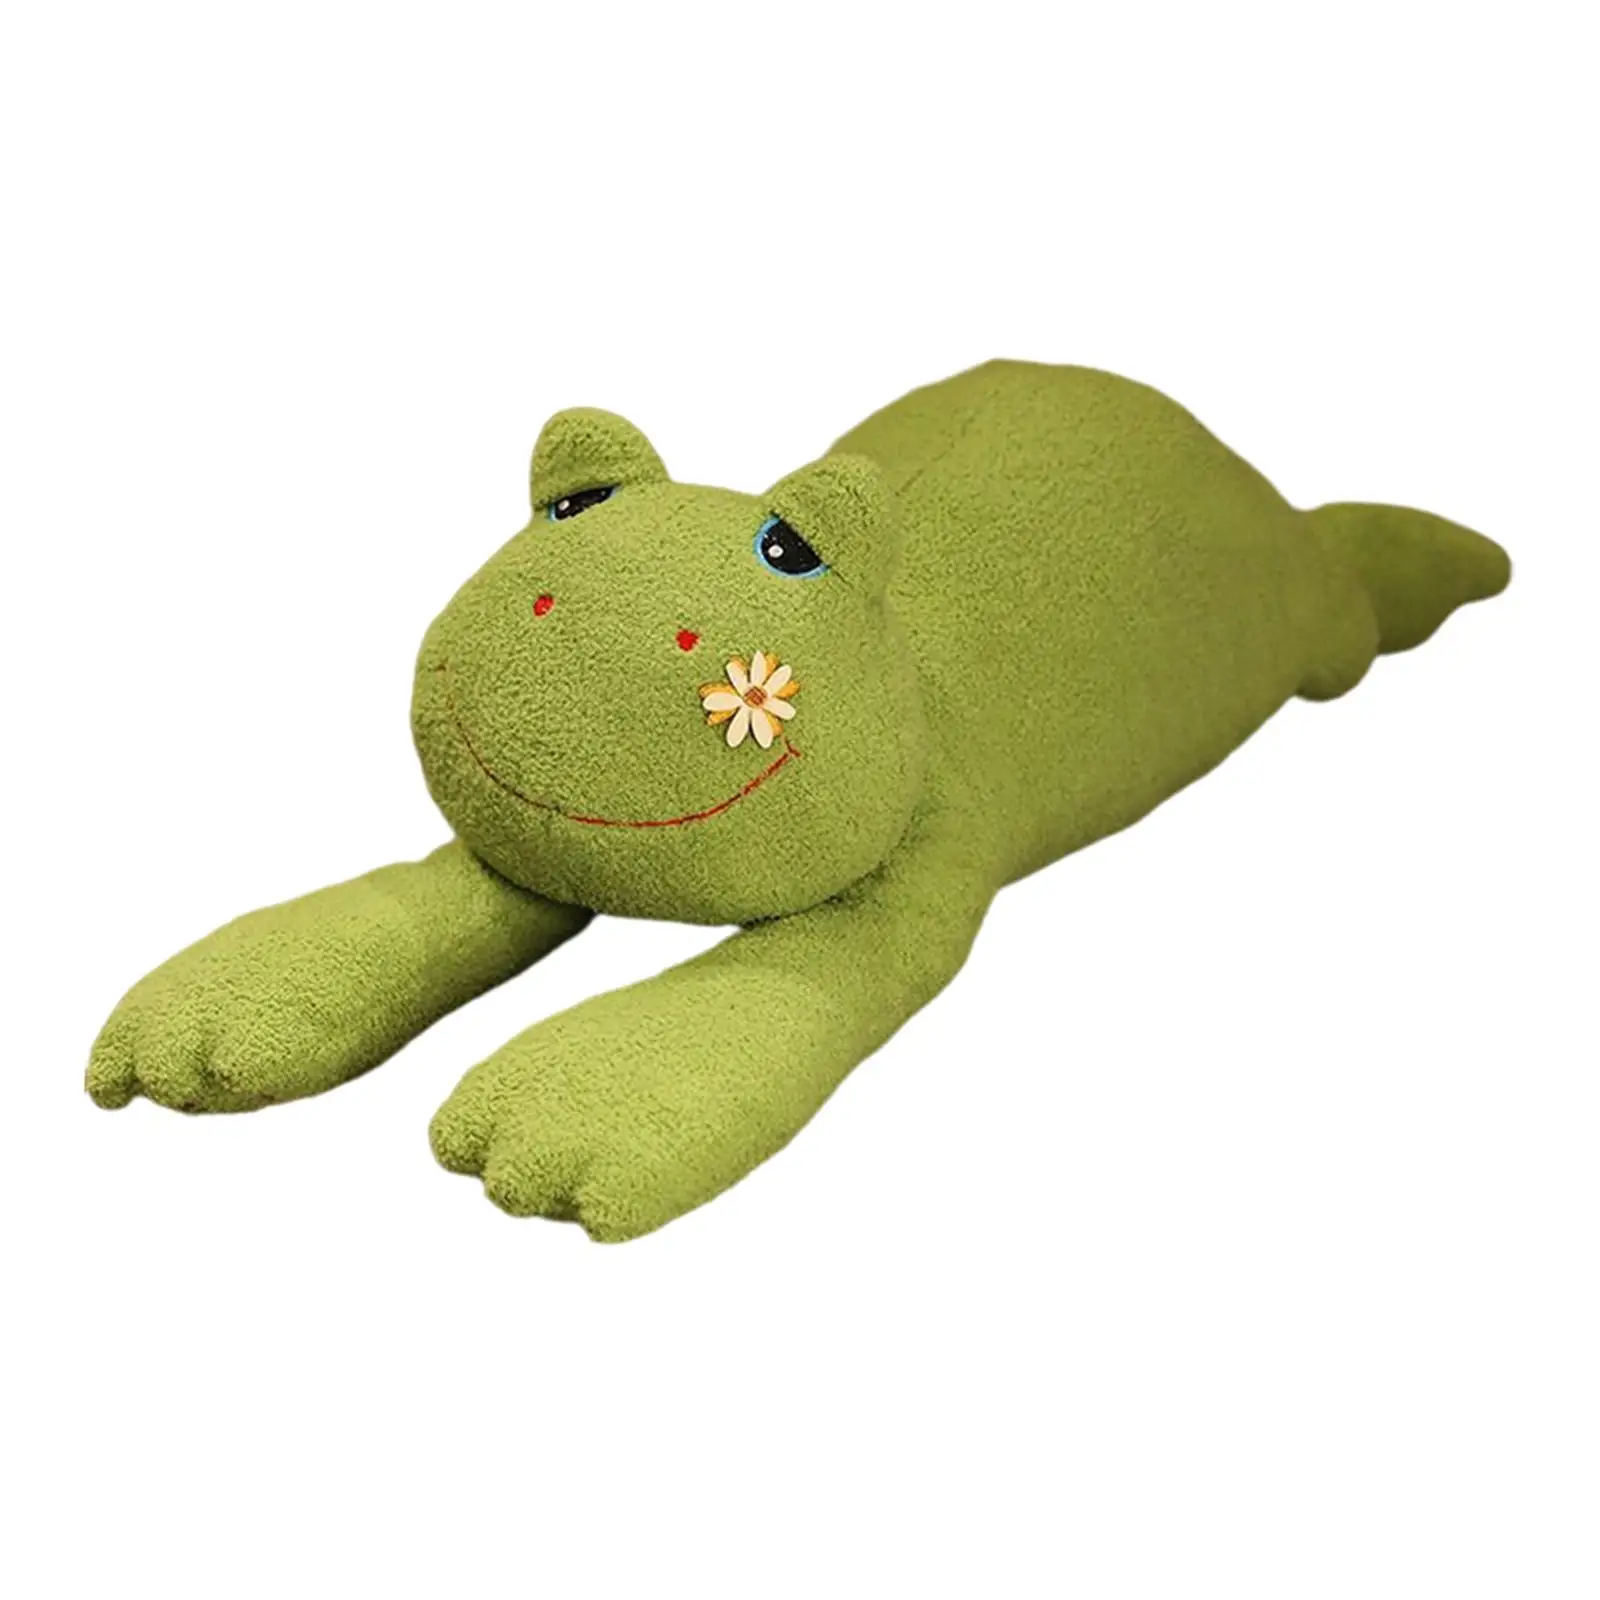 Adorable Frog Plush Toy Frog pillow Home Decoration Soft Stuffed Animal for Party Holiday Sofa Decor Girlfriend Kids